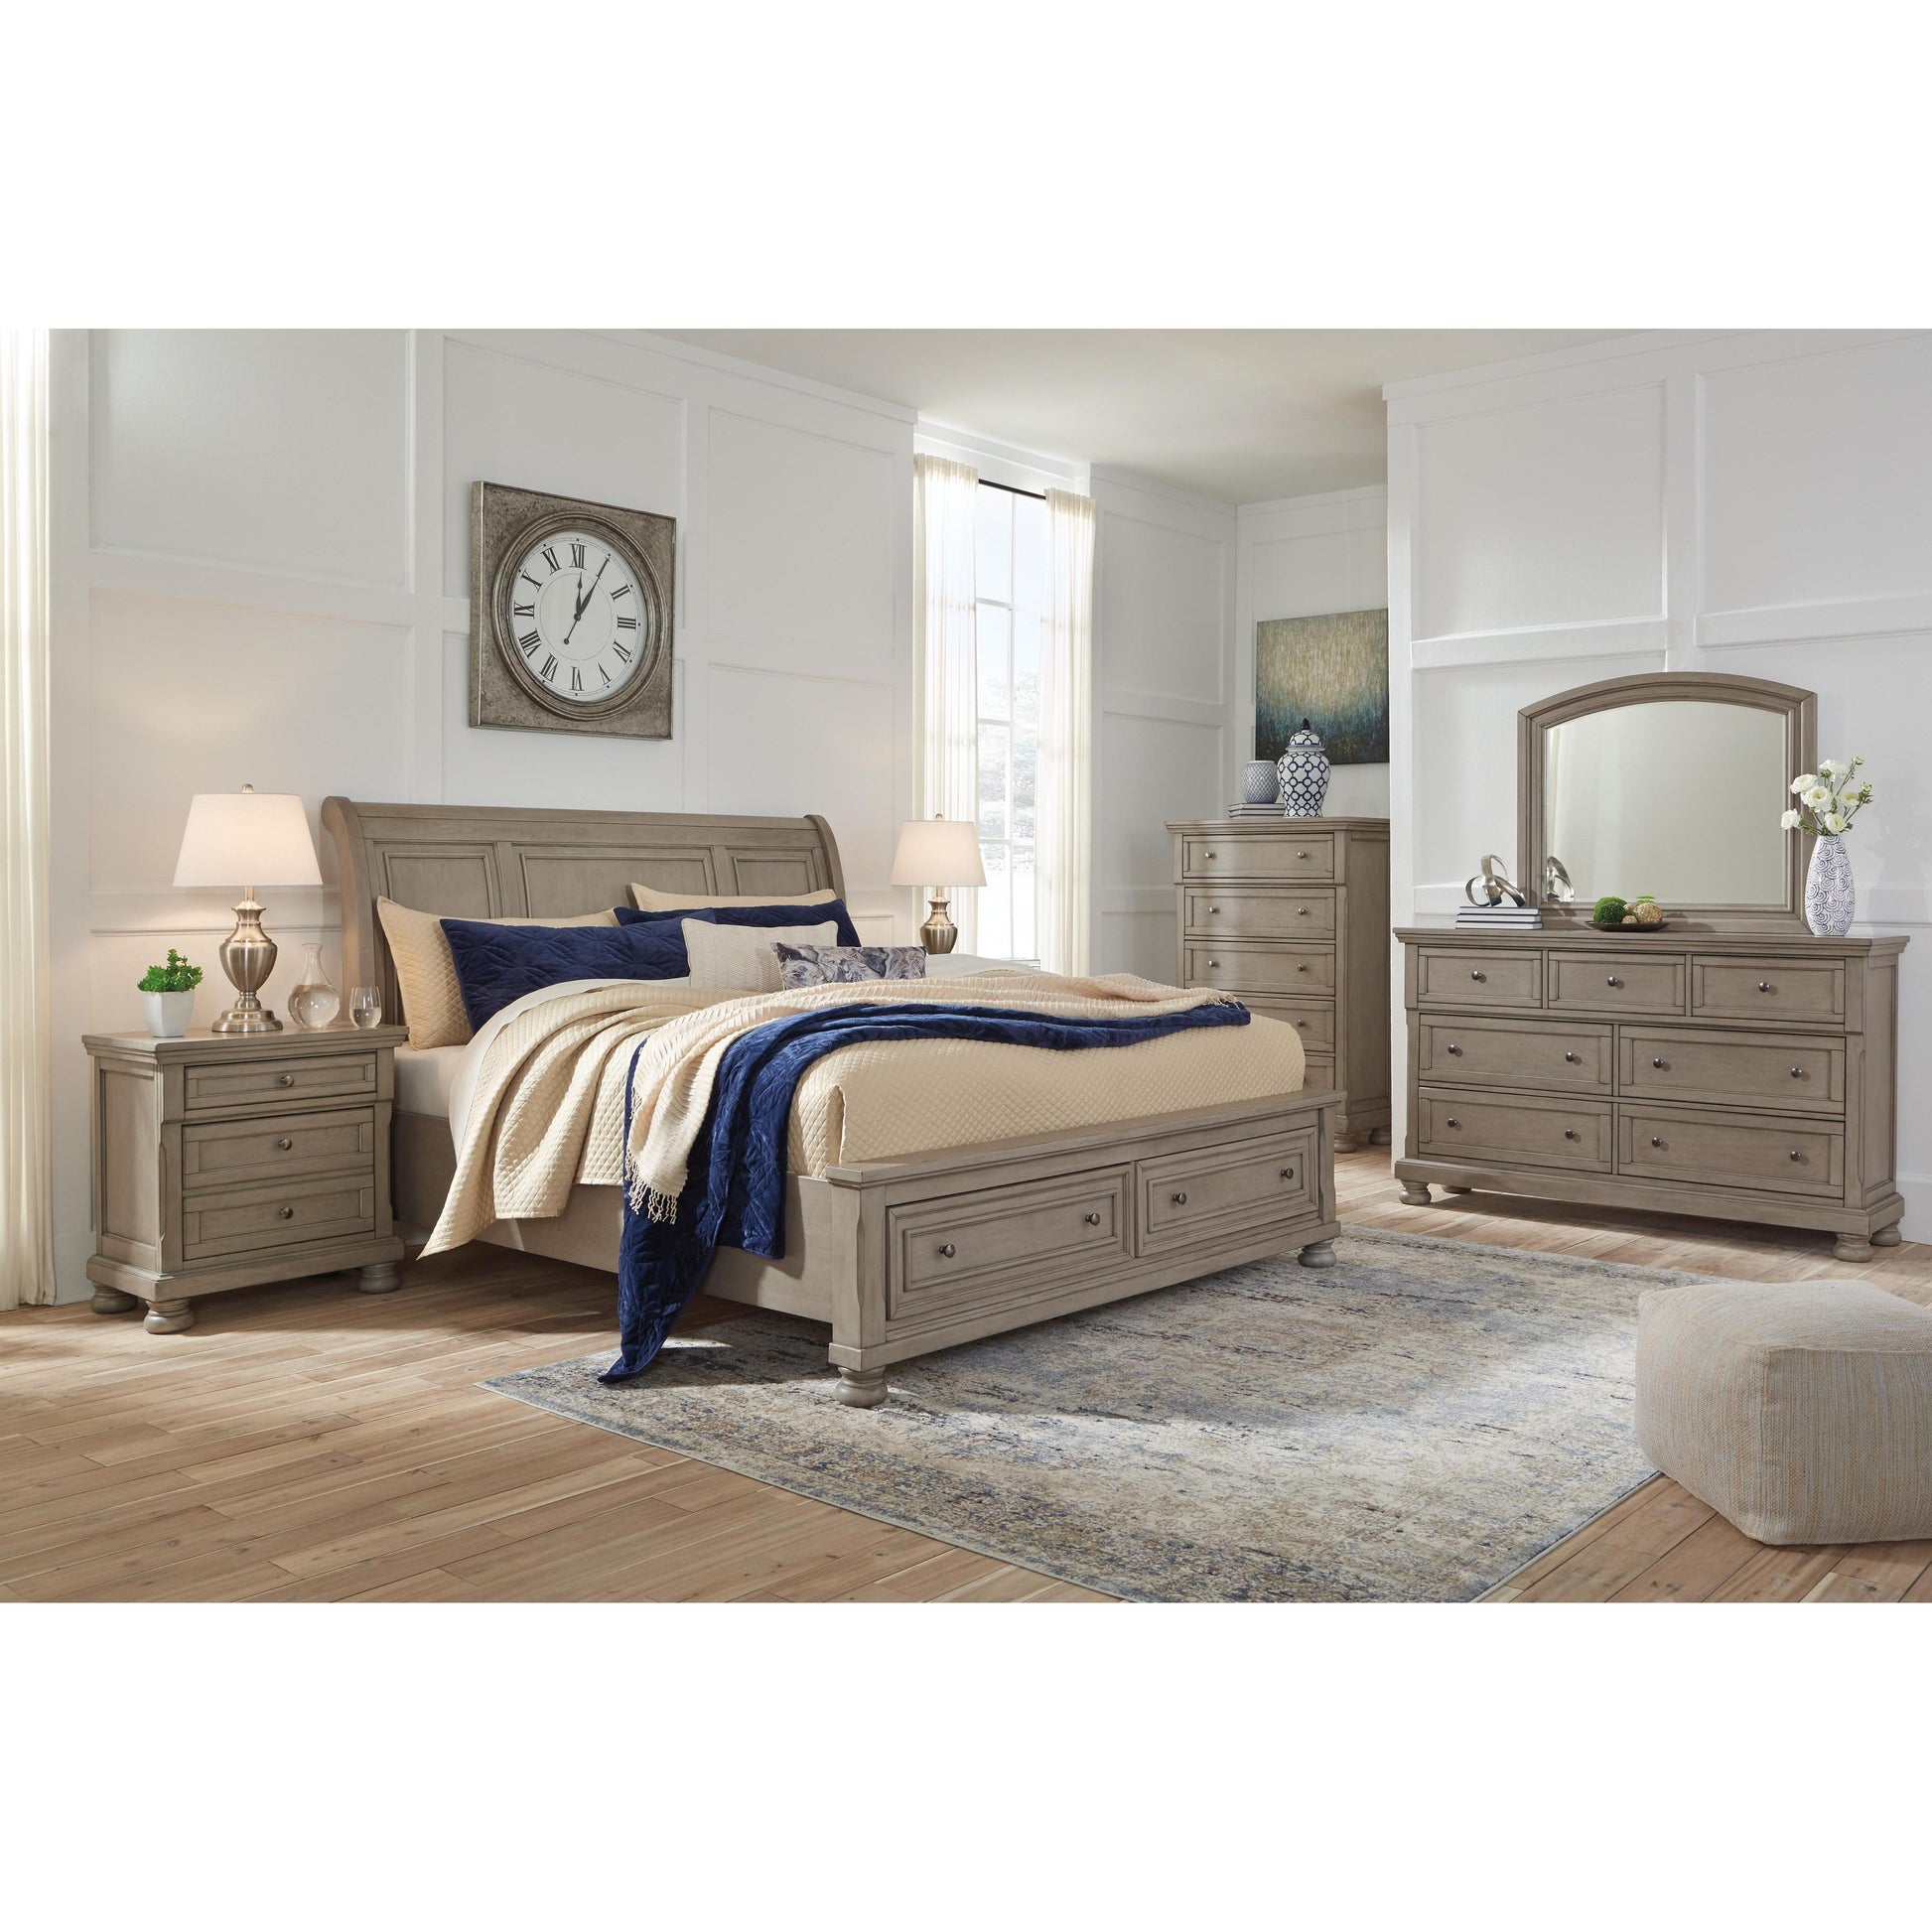 Signature Design by Ashley Lettner B733 8 pc Queen Sleigh Storage Bedroom Set IMAGE 1